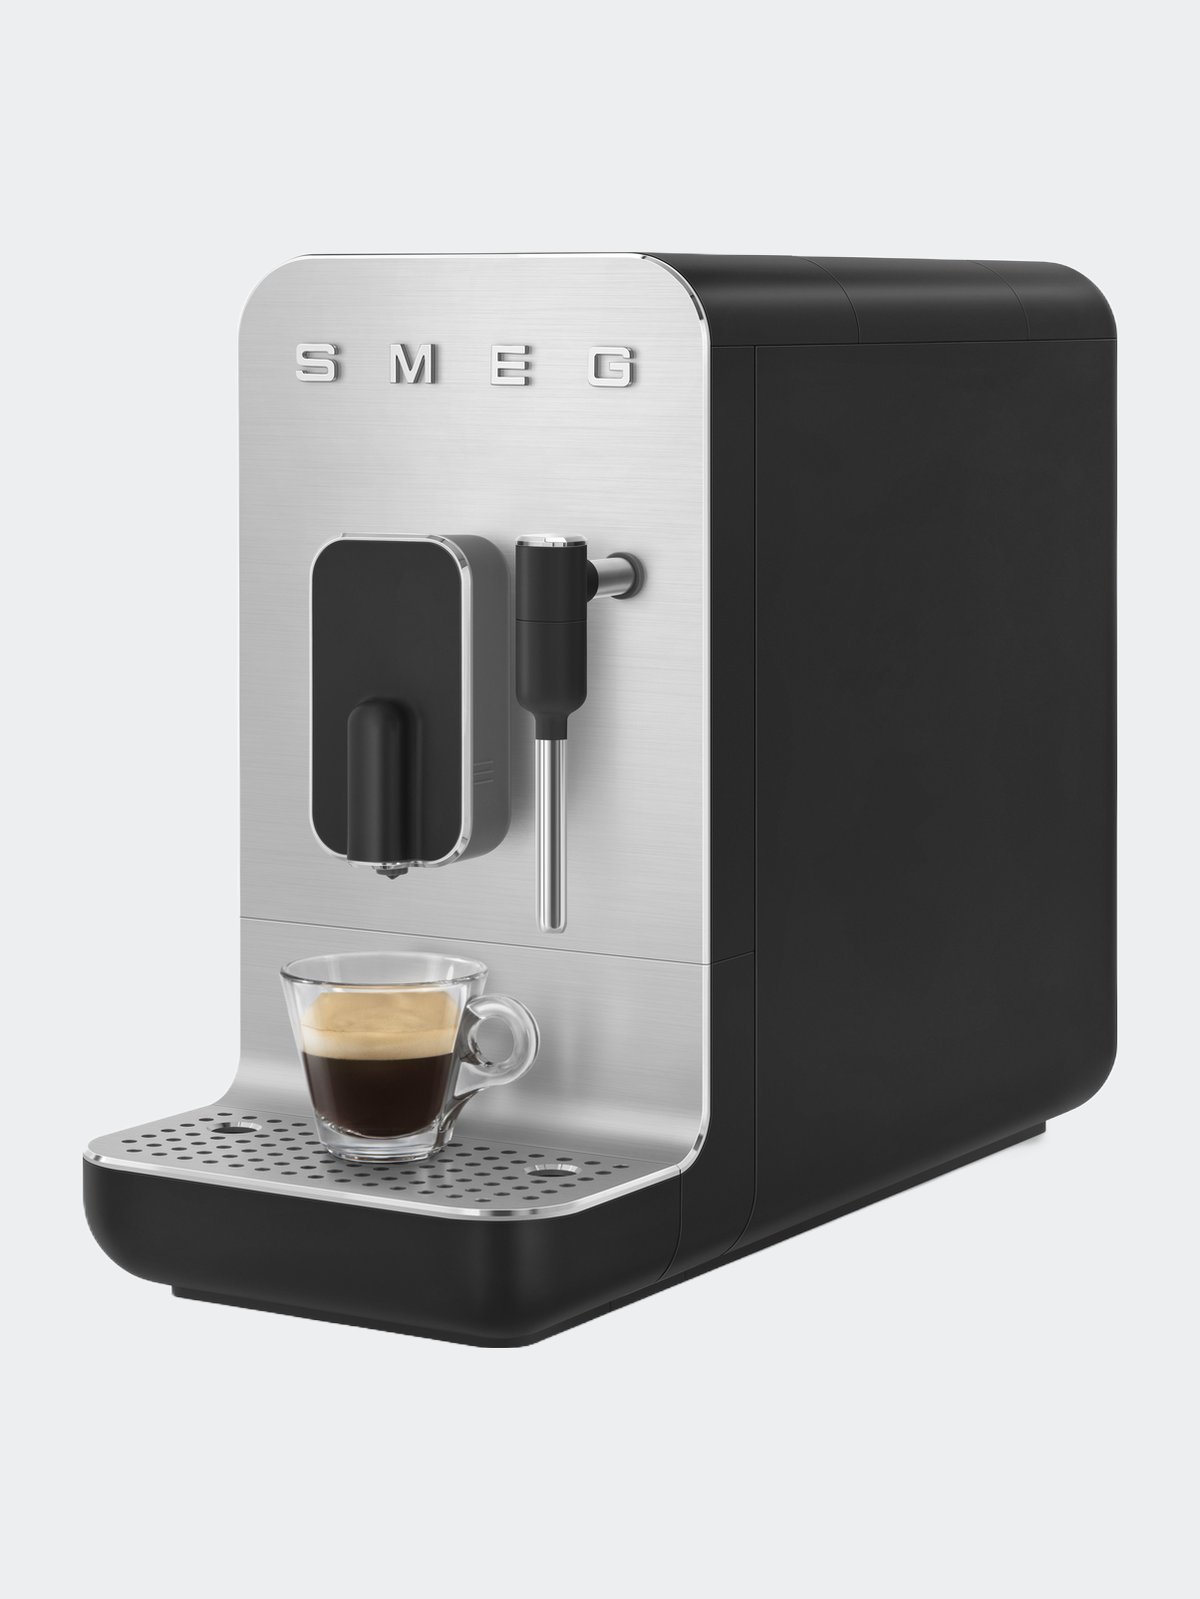 https://images.verishop.com/smeg-fully-automatic-coffee-machine-with-steamer/M00812895022261-2373765577?auto=format&cs=strip&fit=max&w=1200